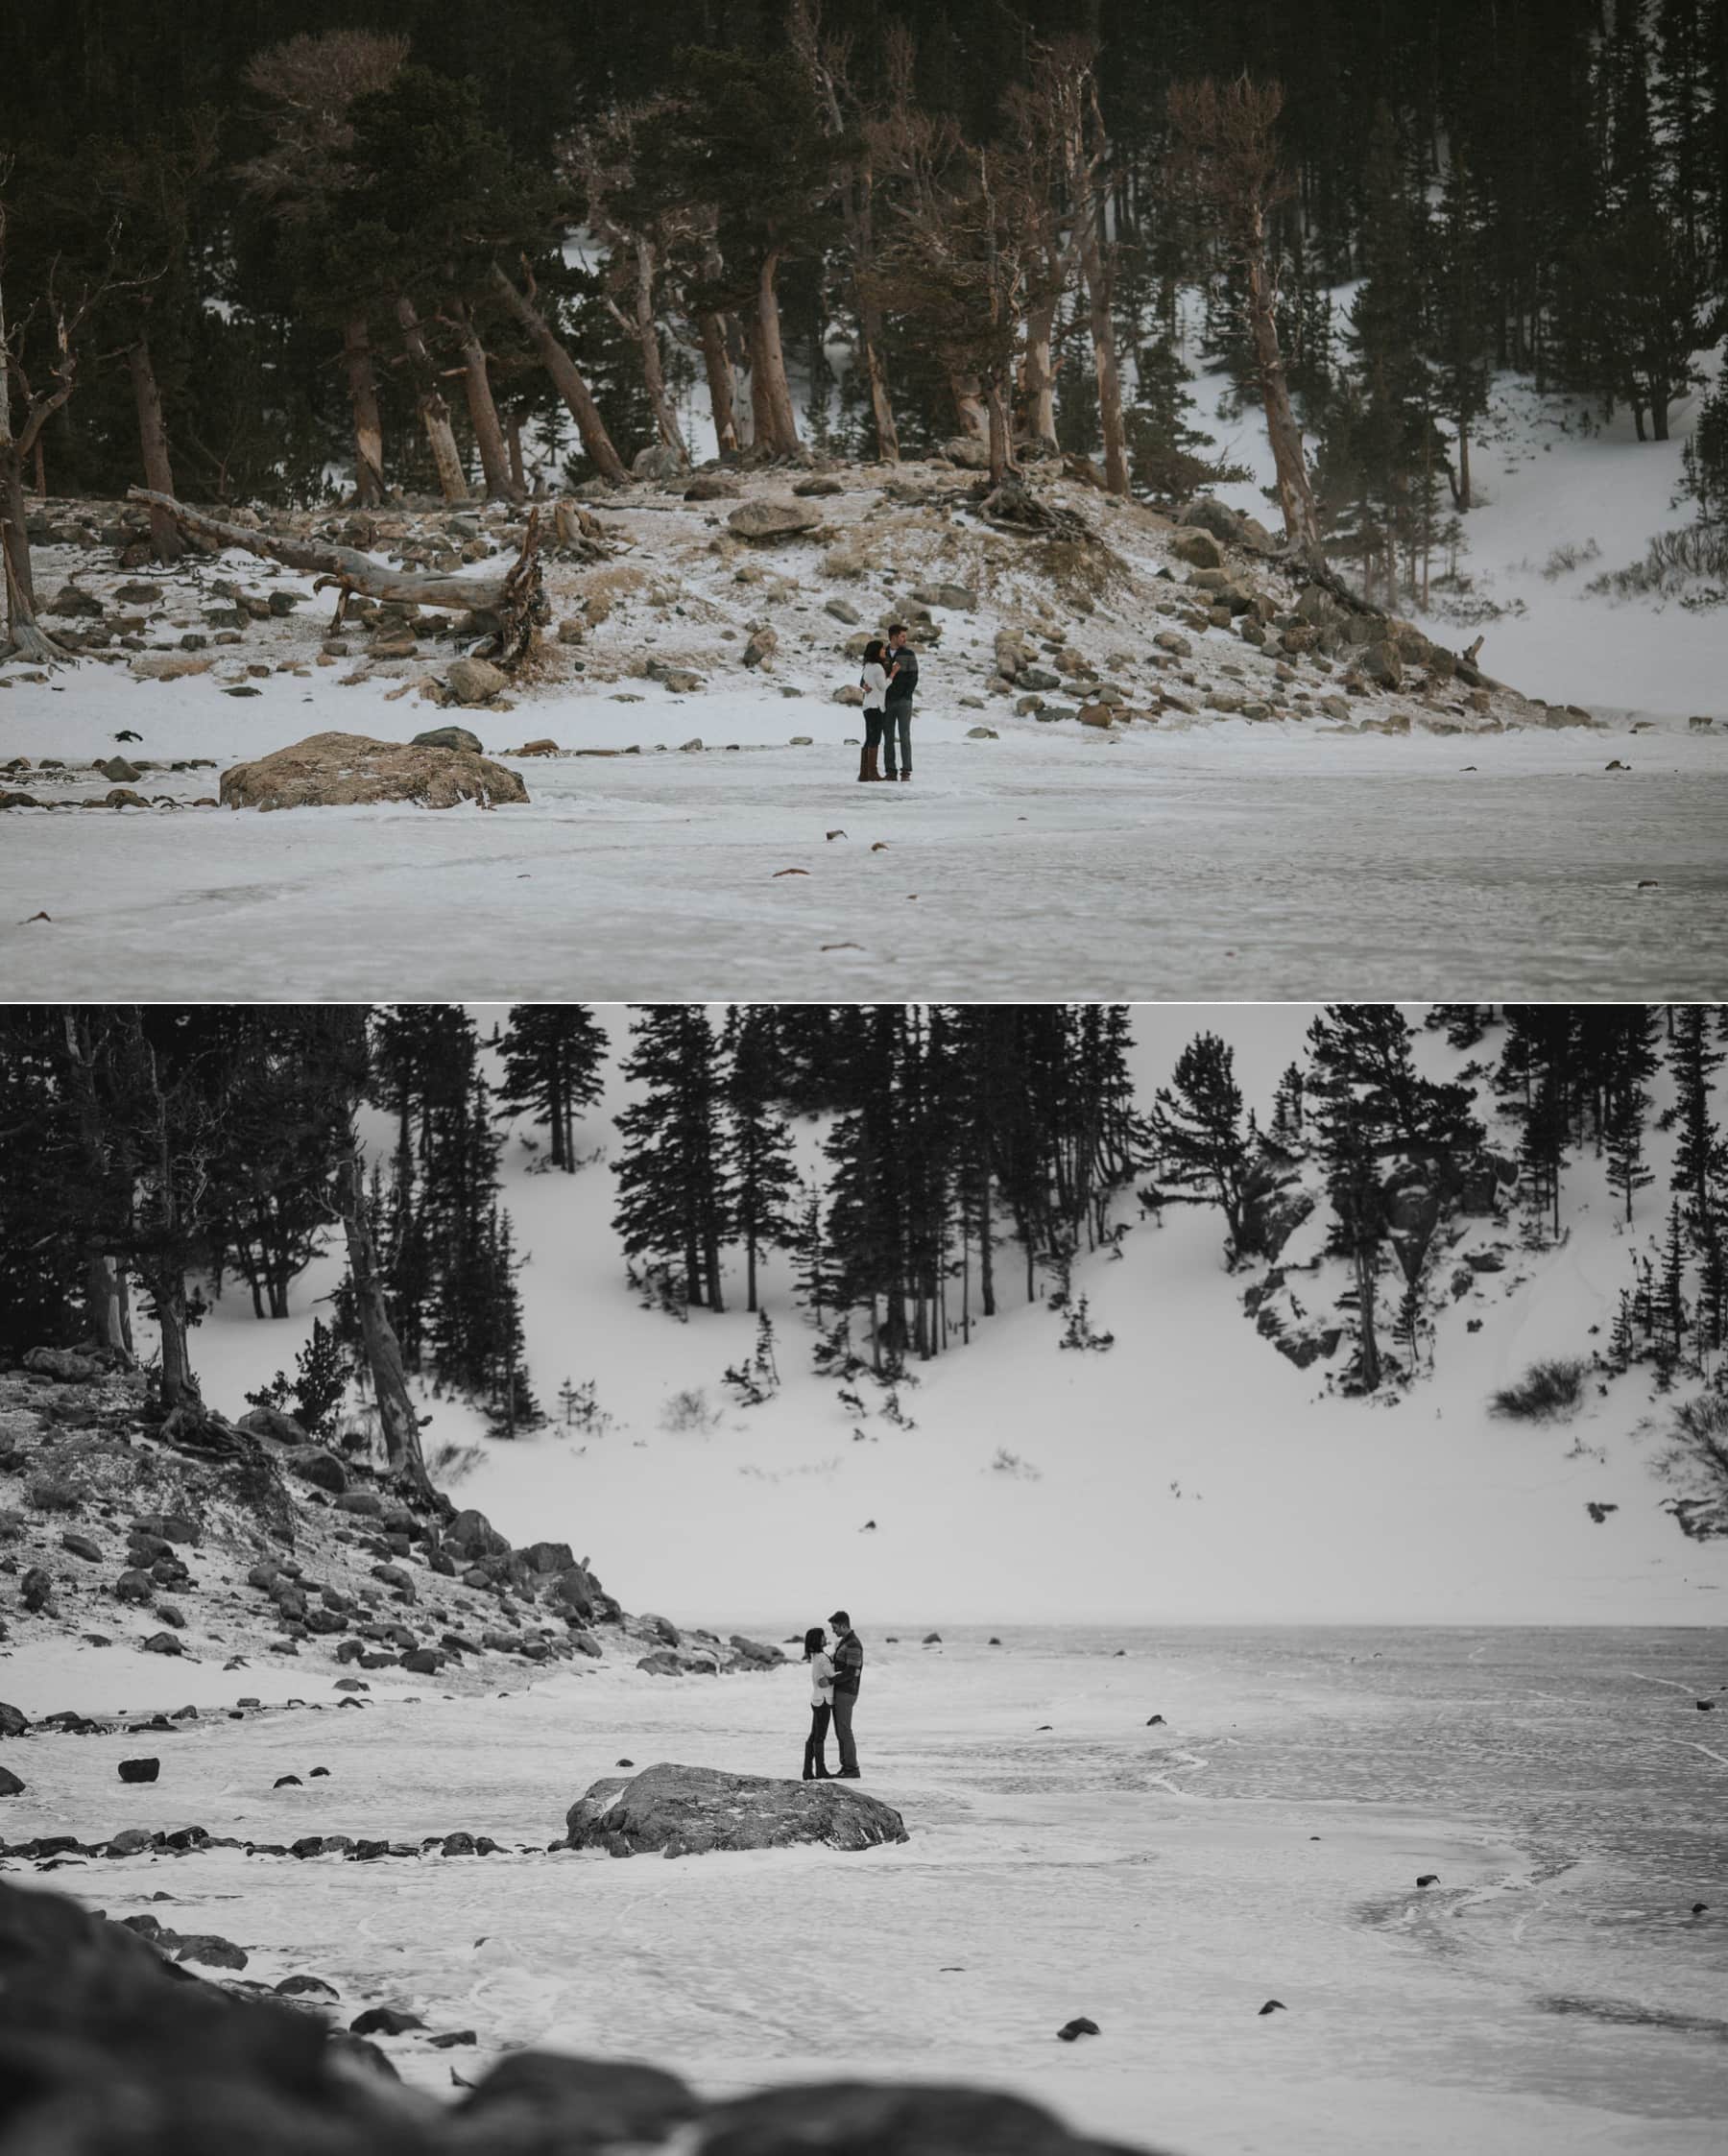 st. mary's glacier, winter engagement session, mountain winter engagement session, colorado adventure engagement session, windy winter engagement session, winter engagement session